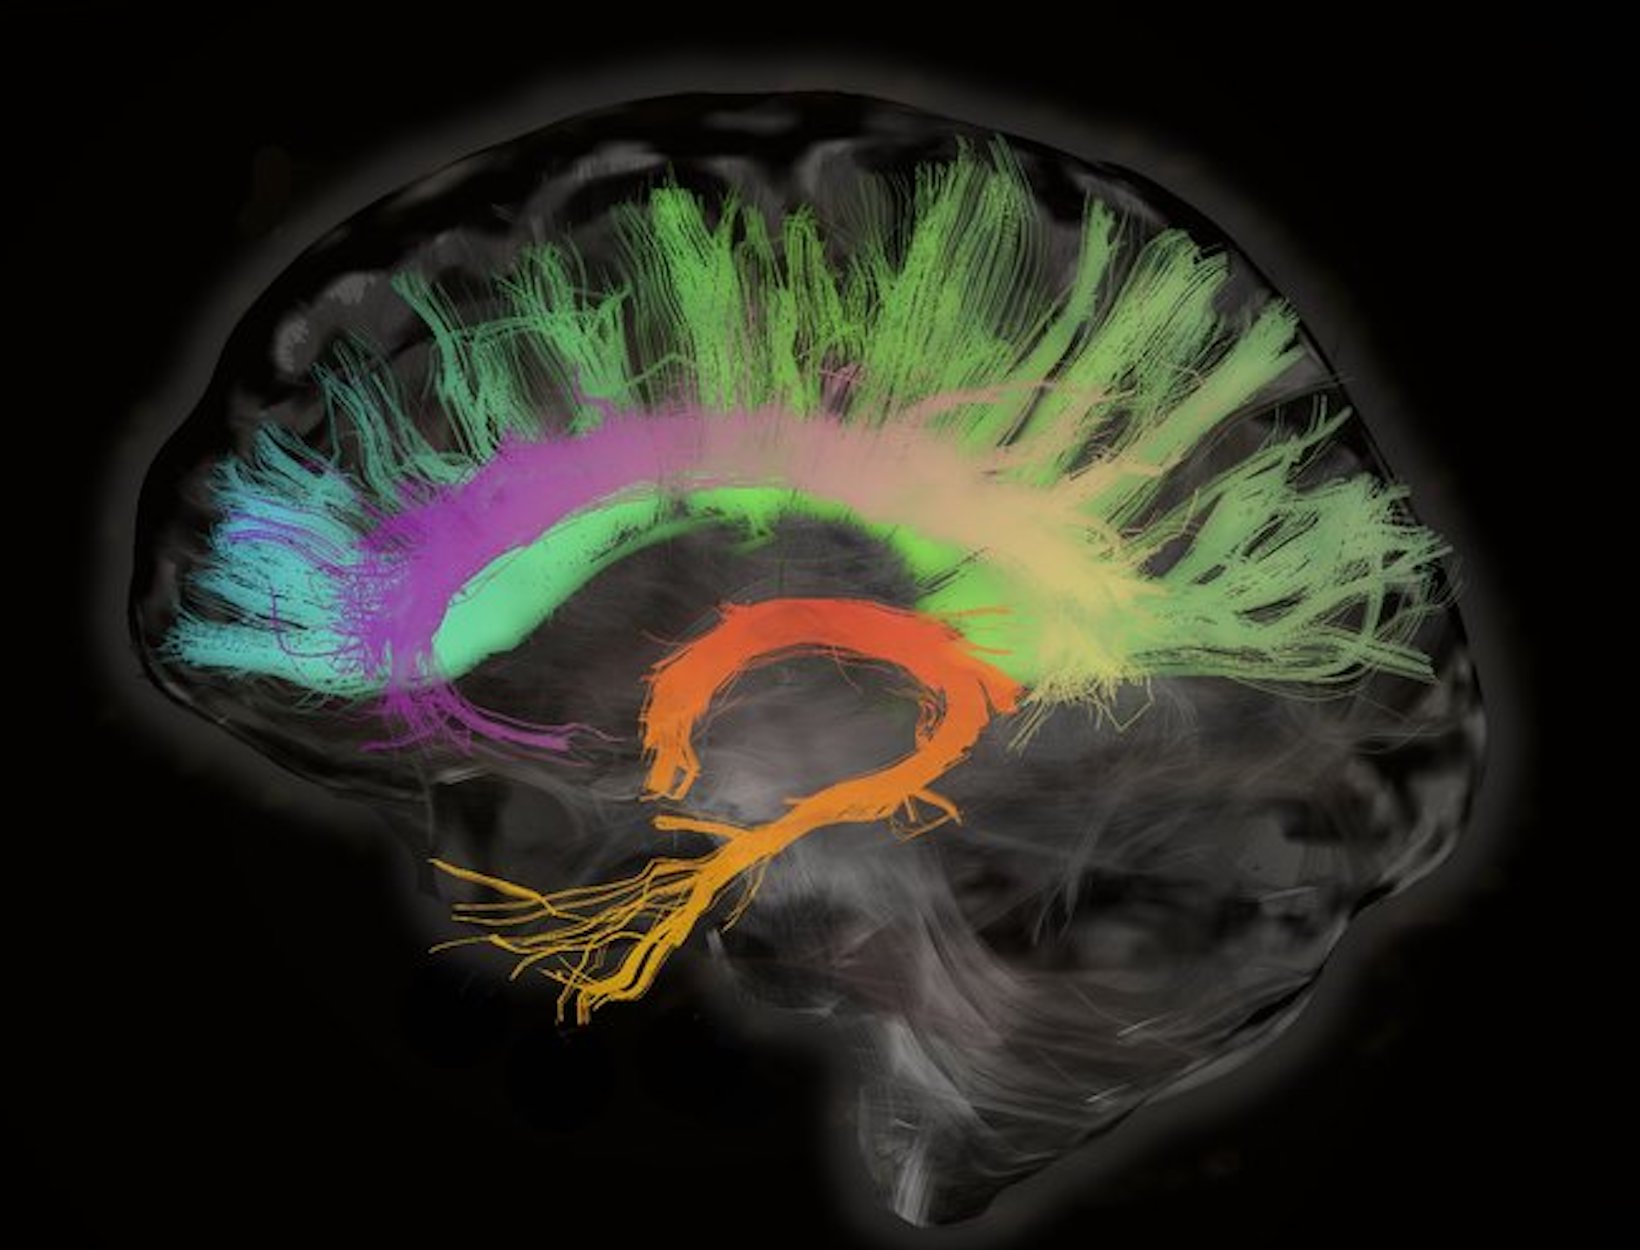 Scans Show Female Brains Remain Youthful as Male Brains Wind Down